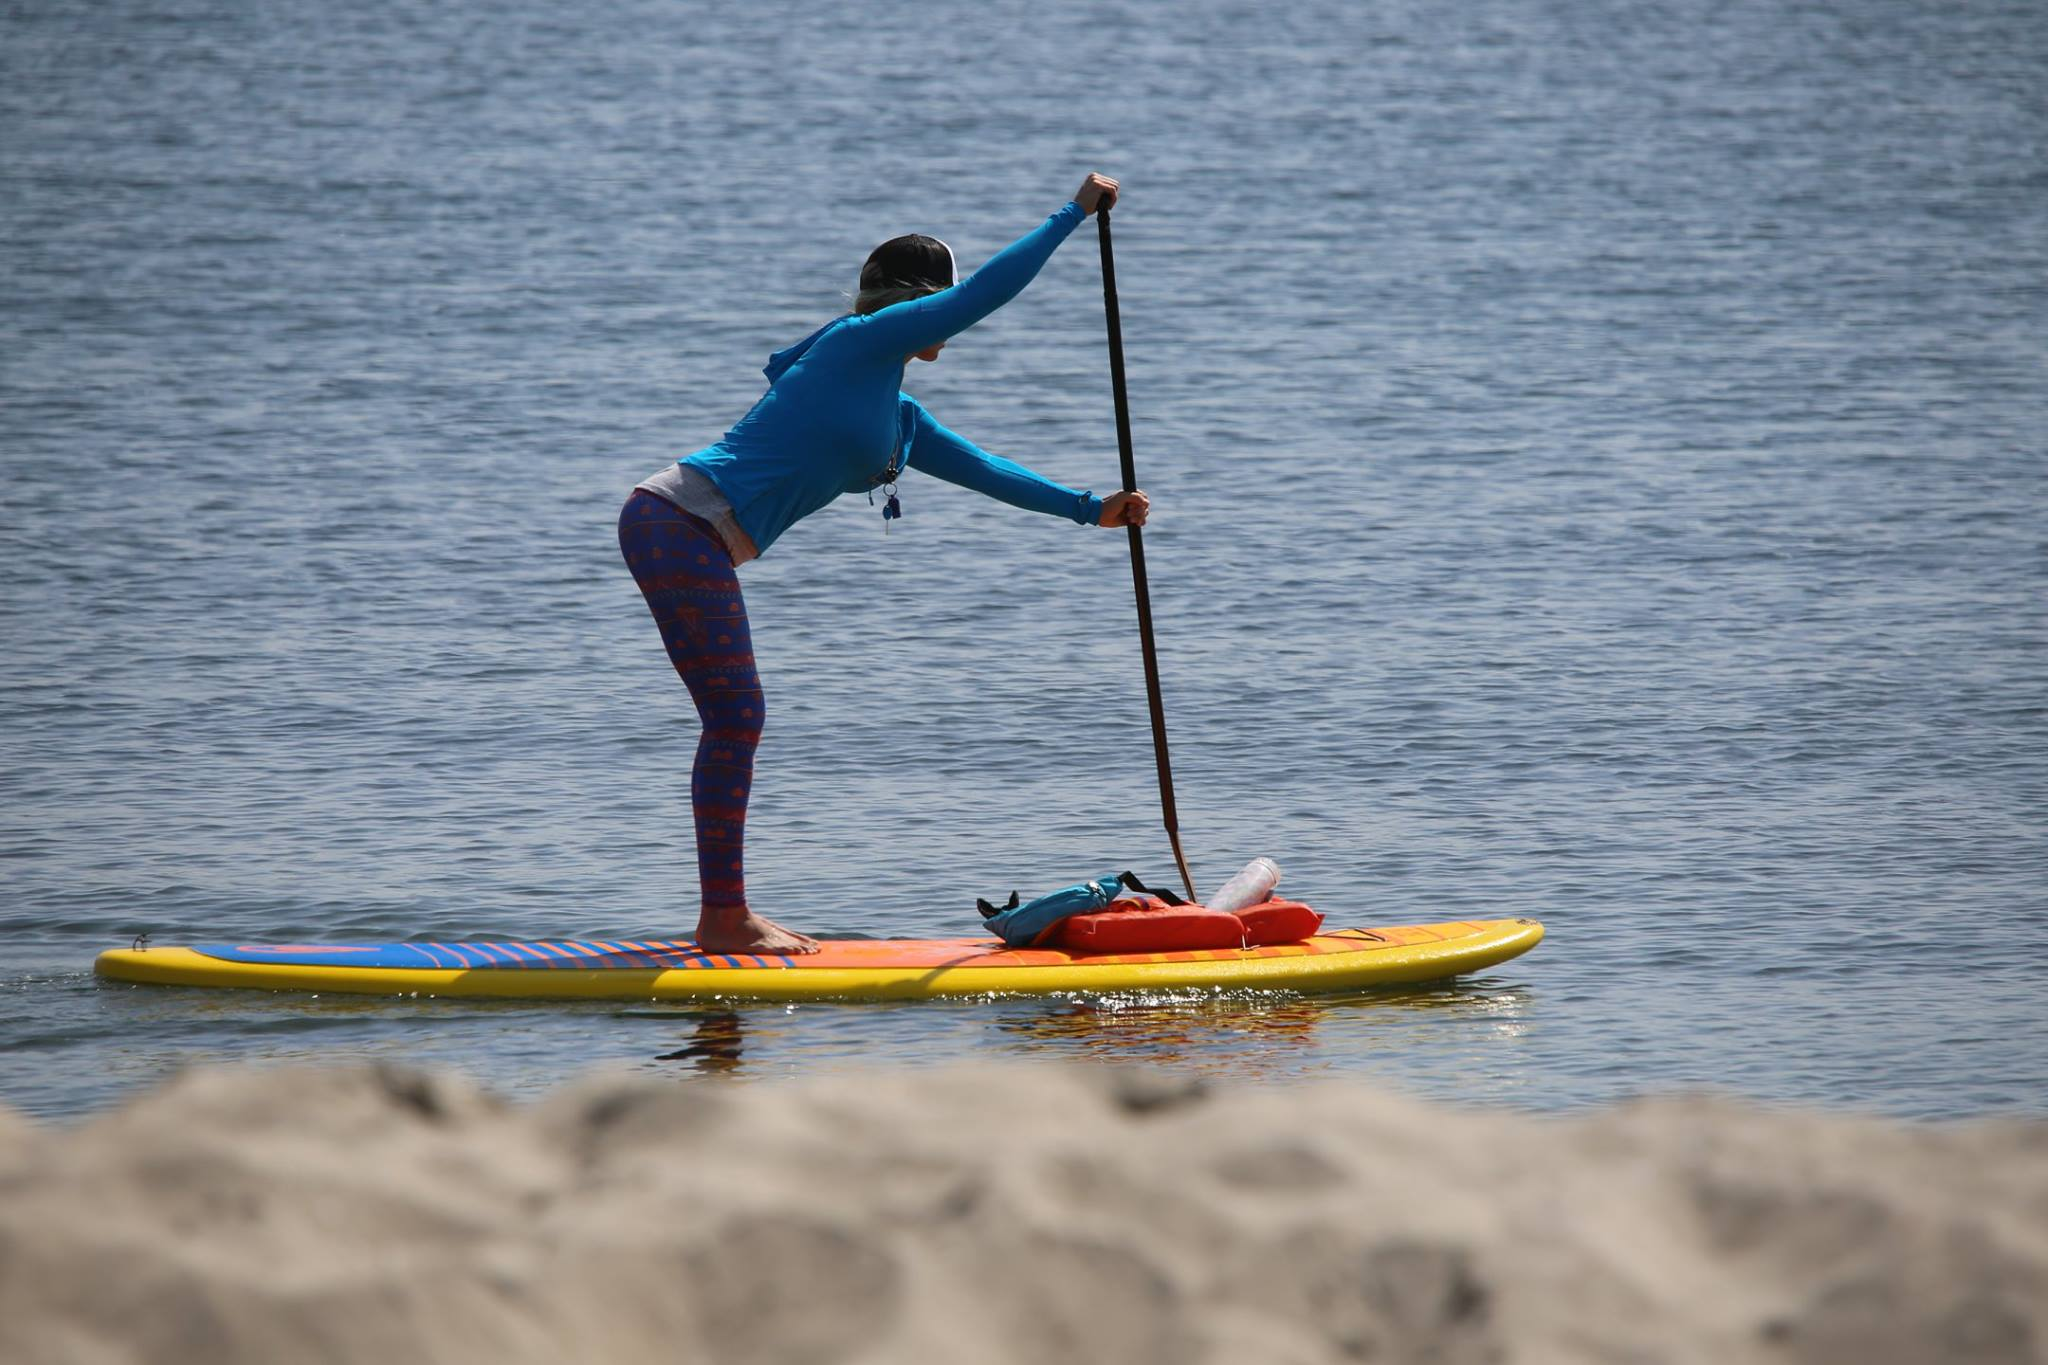 stand up paddle boards give a great workout